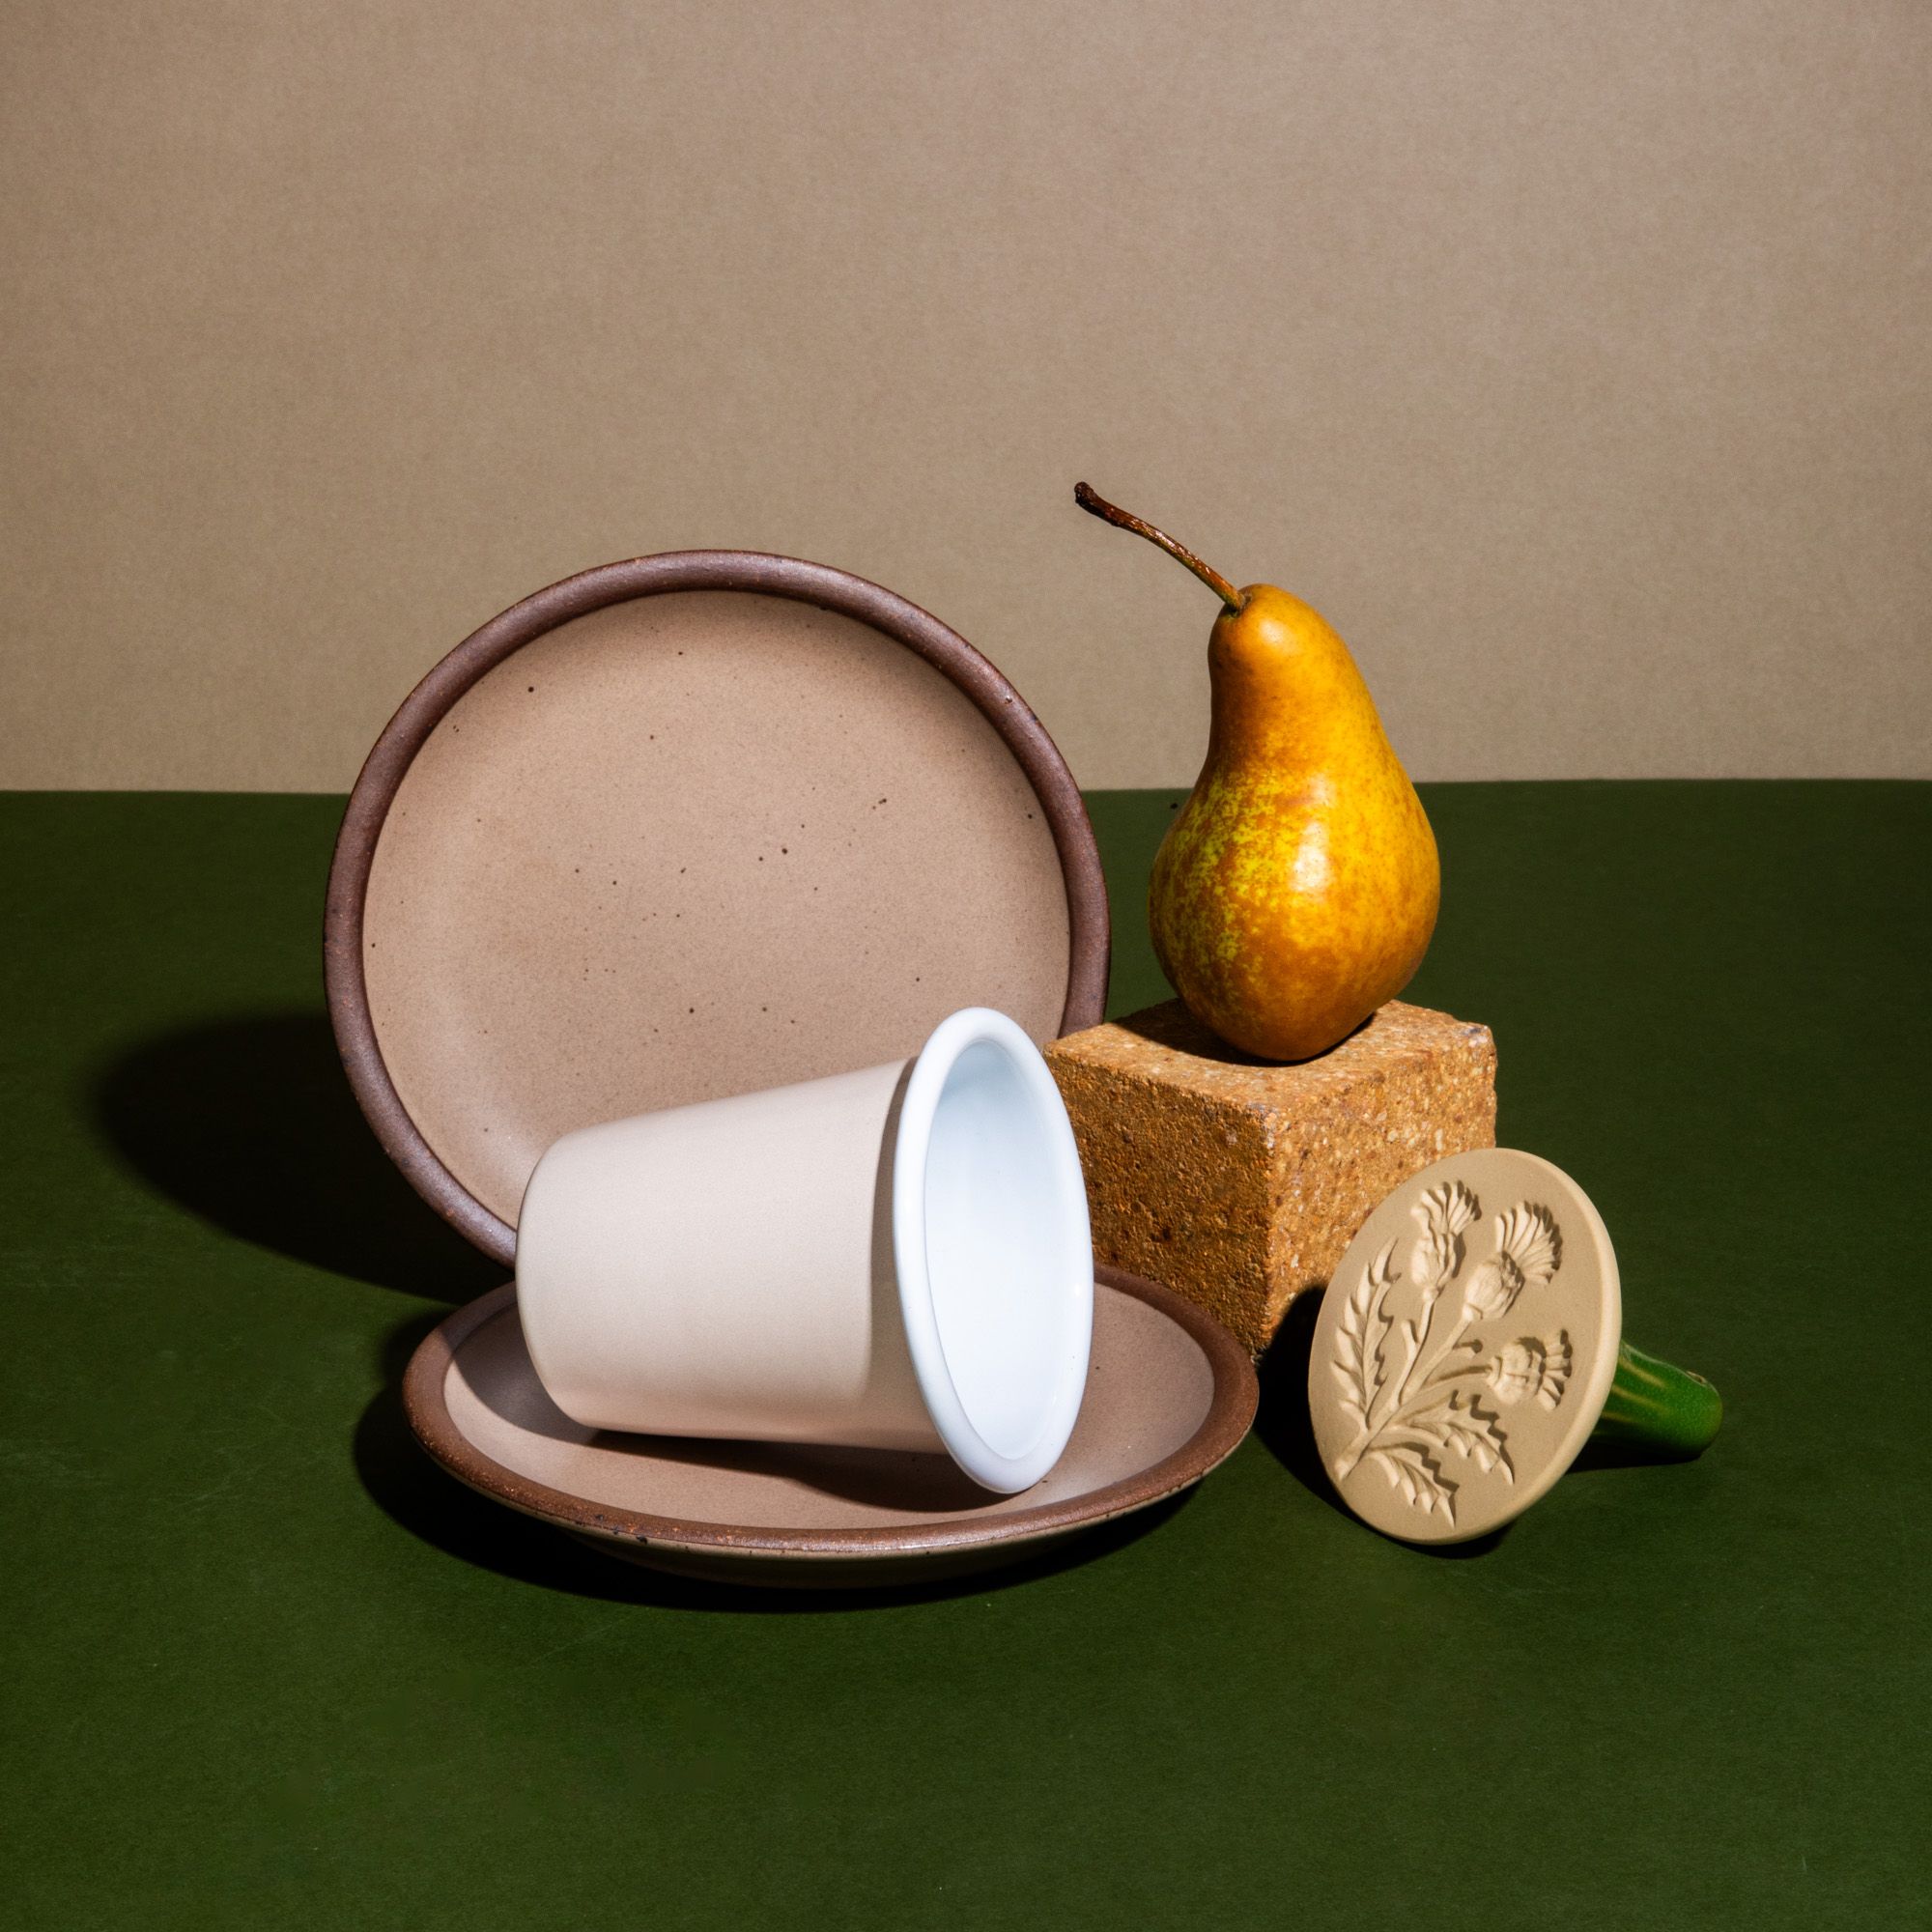 An artful display of light tan ceramic plates, a cream enamel cup, a cookie stamp, and a golden pear arranged against a natural and olive green backdrop.